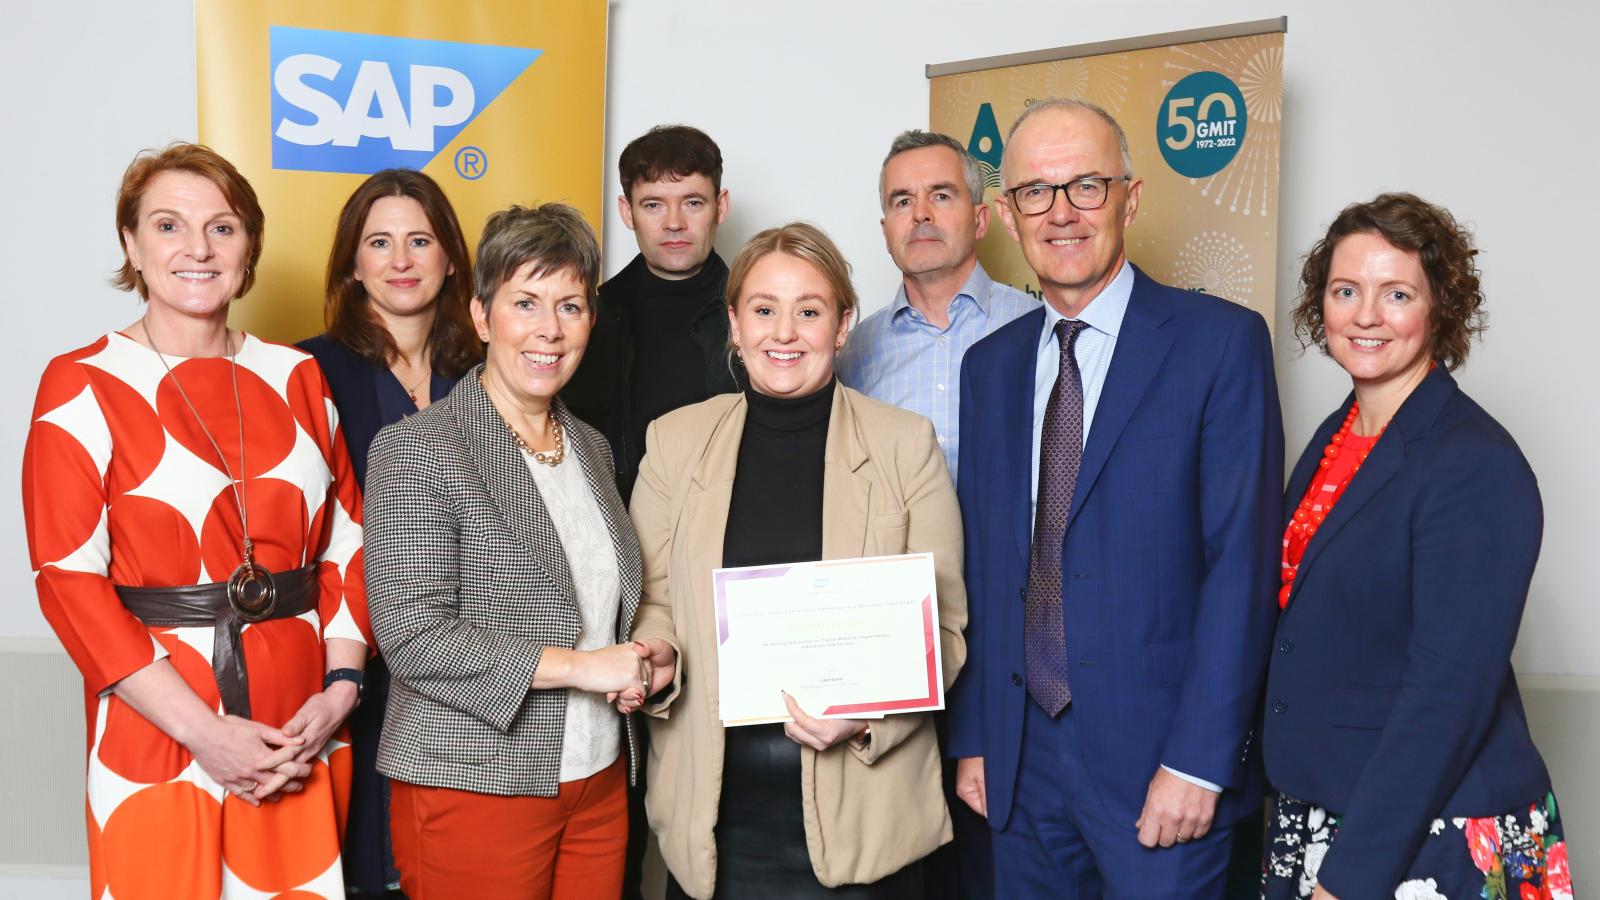  ATU Grainne Harte from Mayo winner of SAP poster competition